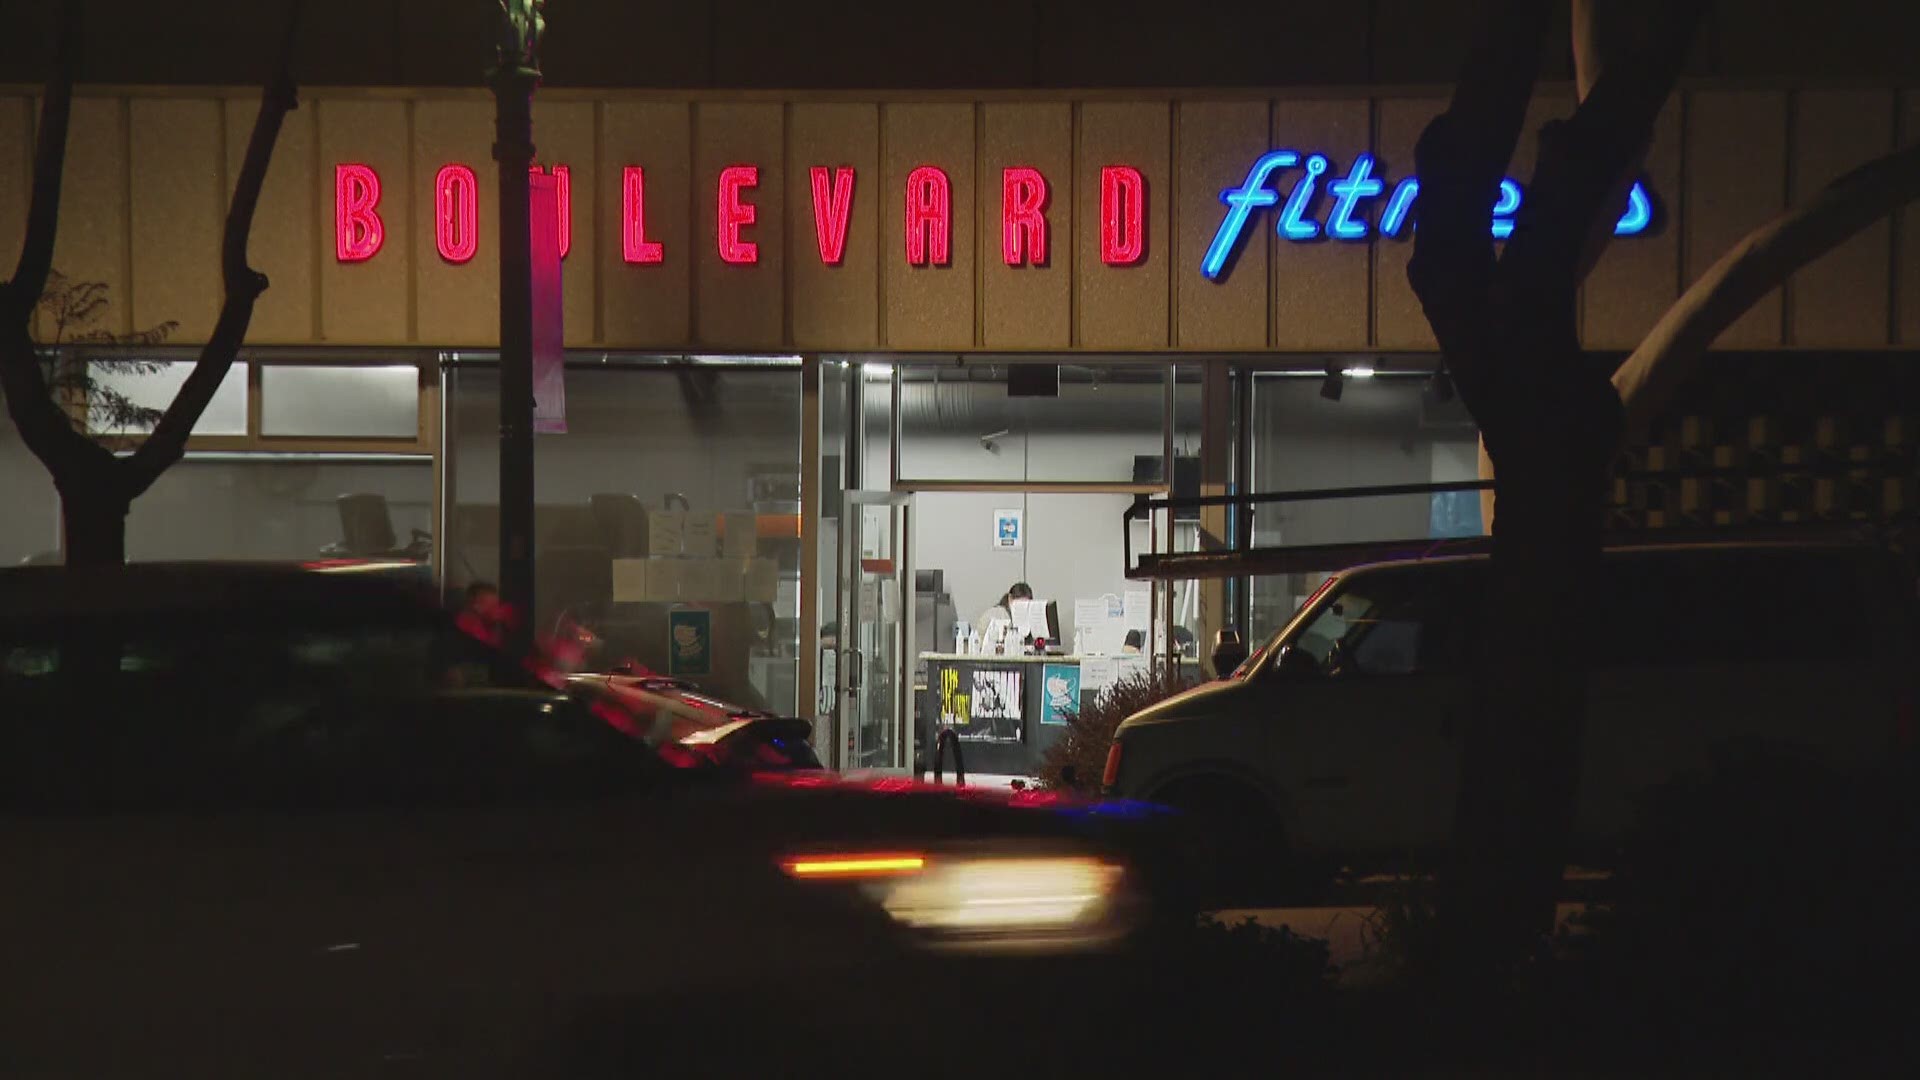 News 8 journalists captured the moment police officers approached Boulevard Fitness to cite the owner. Hours later, however, the gym appeared to have reopened.